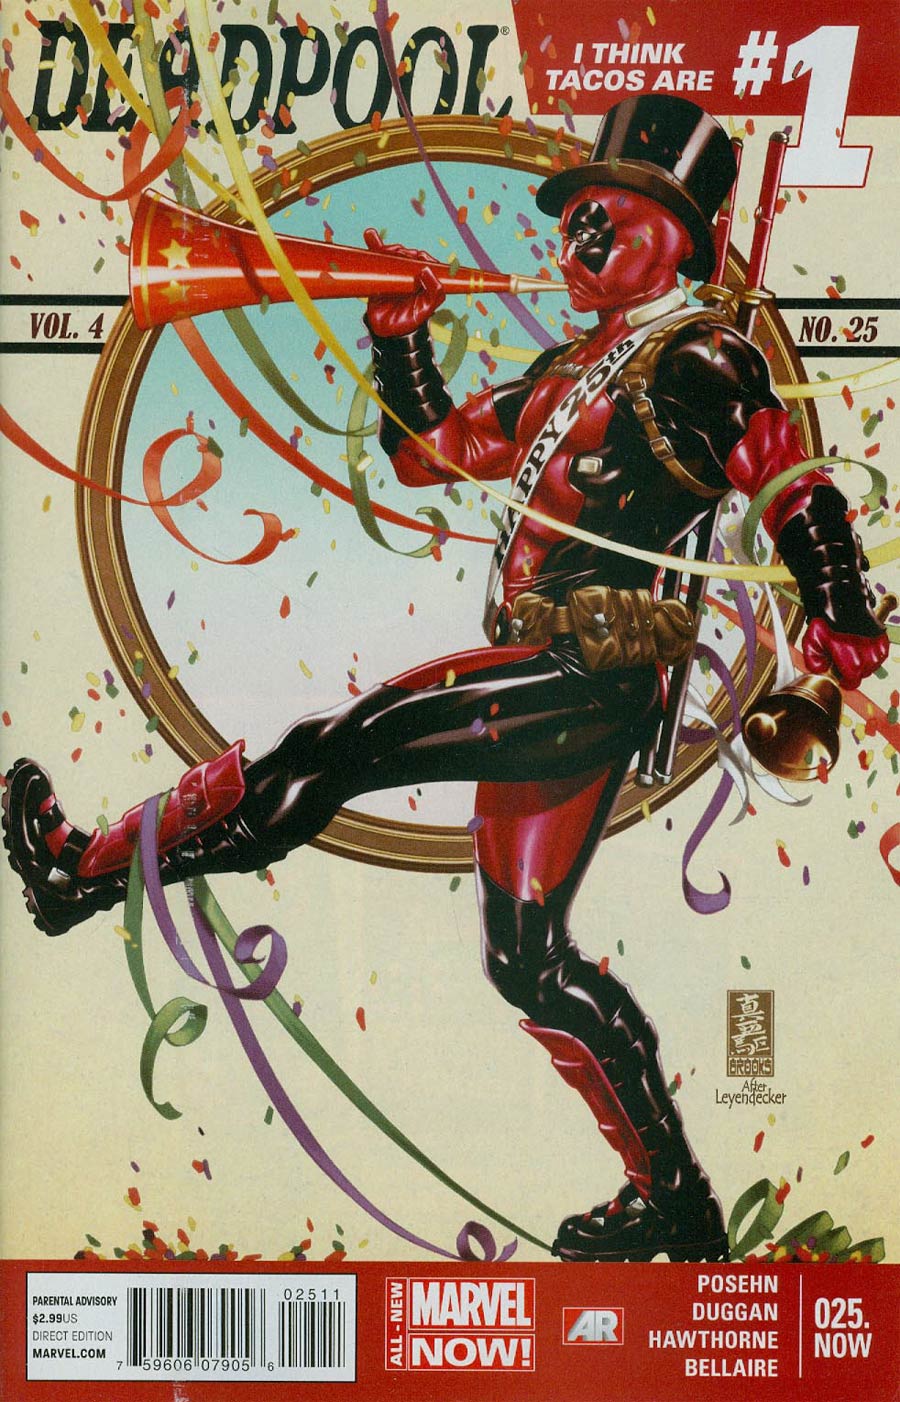 Marvel, 2020 Single Issues *FREE SHIPPING on $25+ NM DEADPOOL #4-8